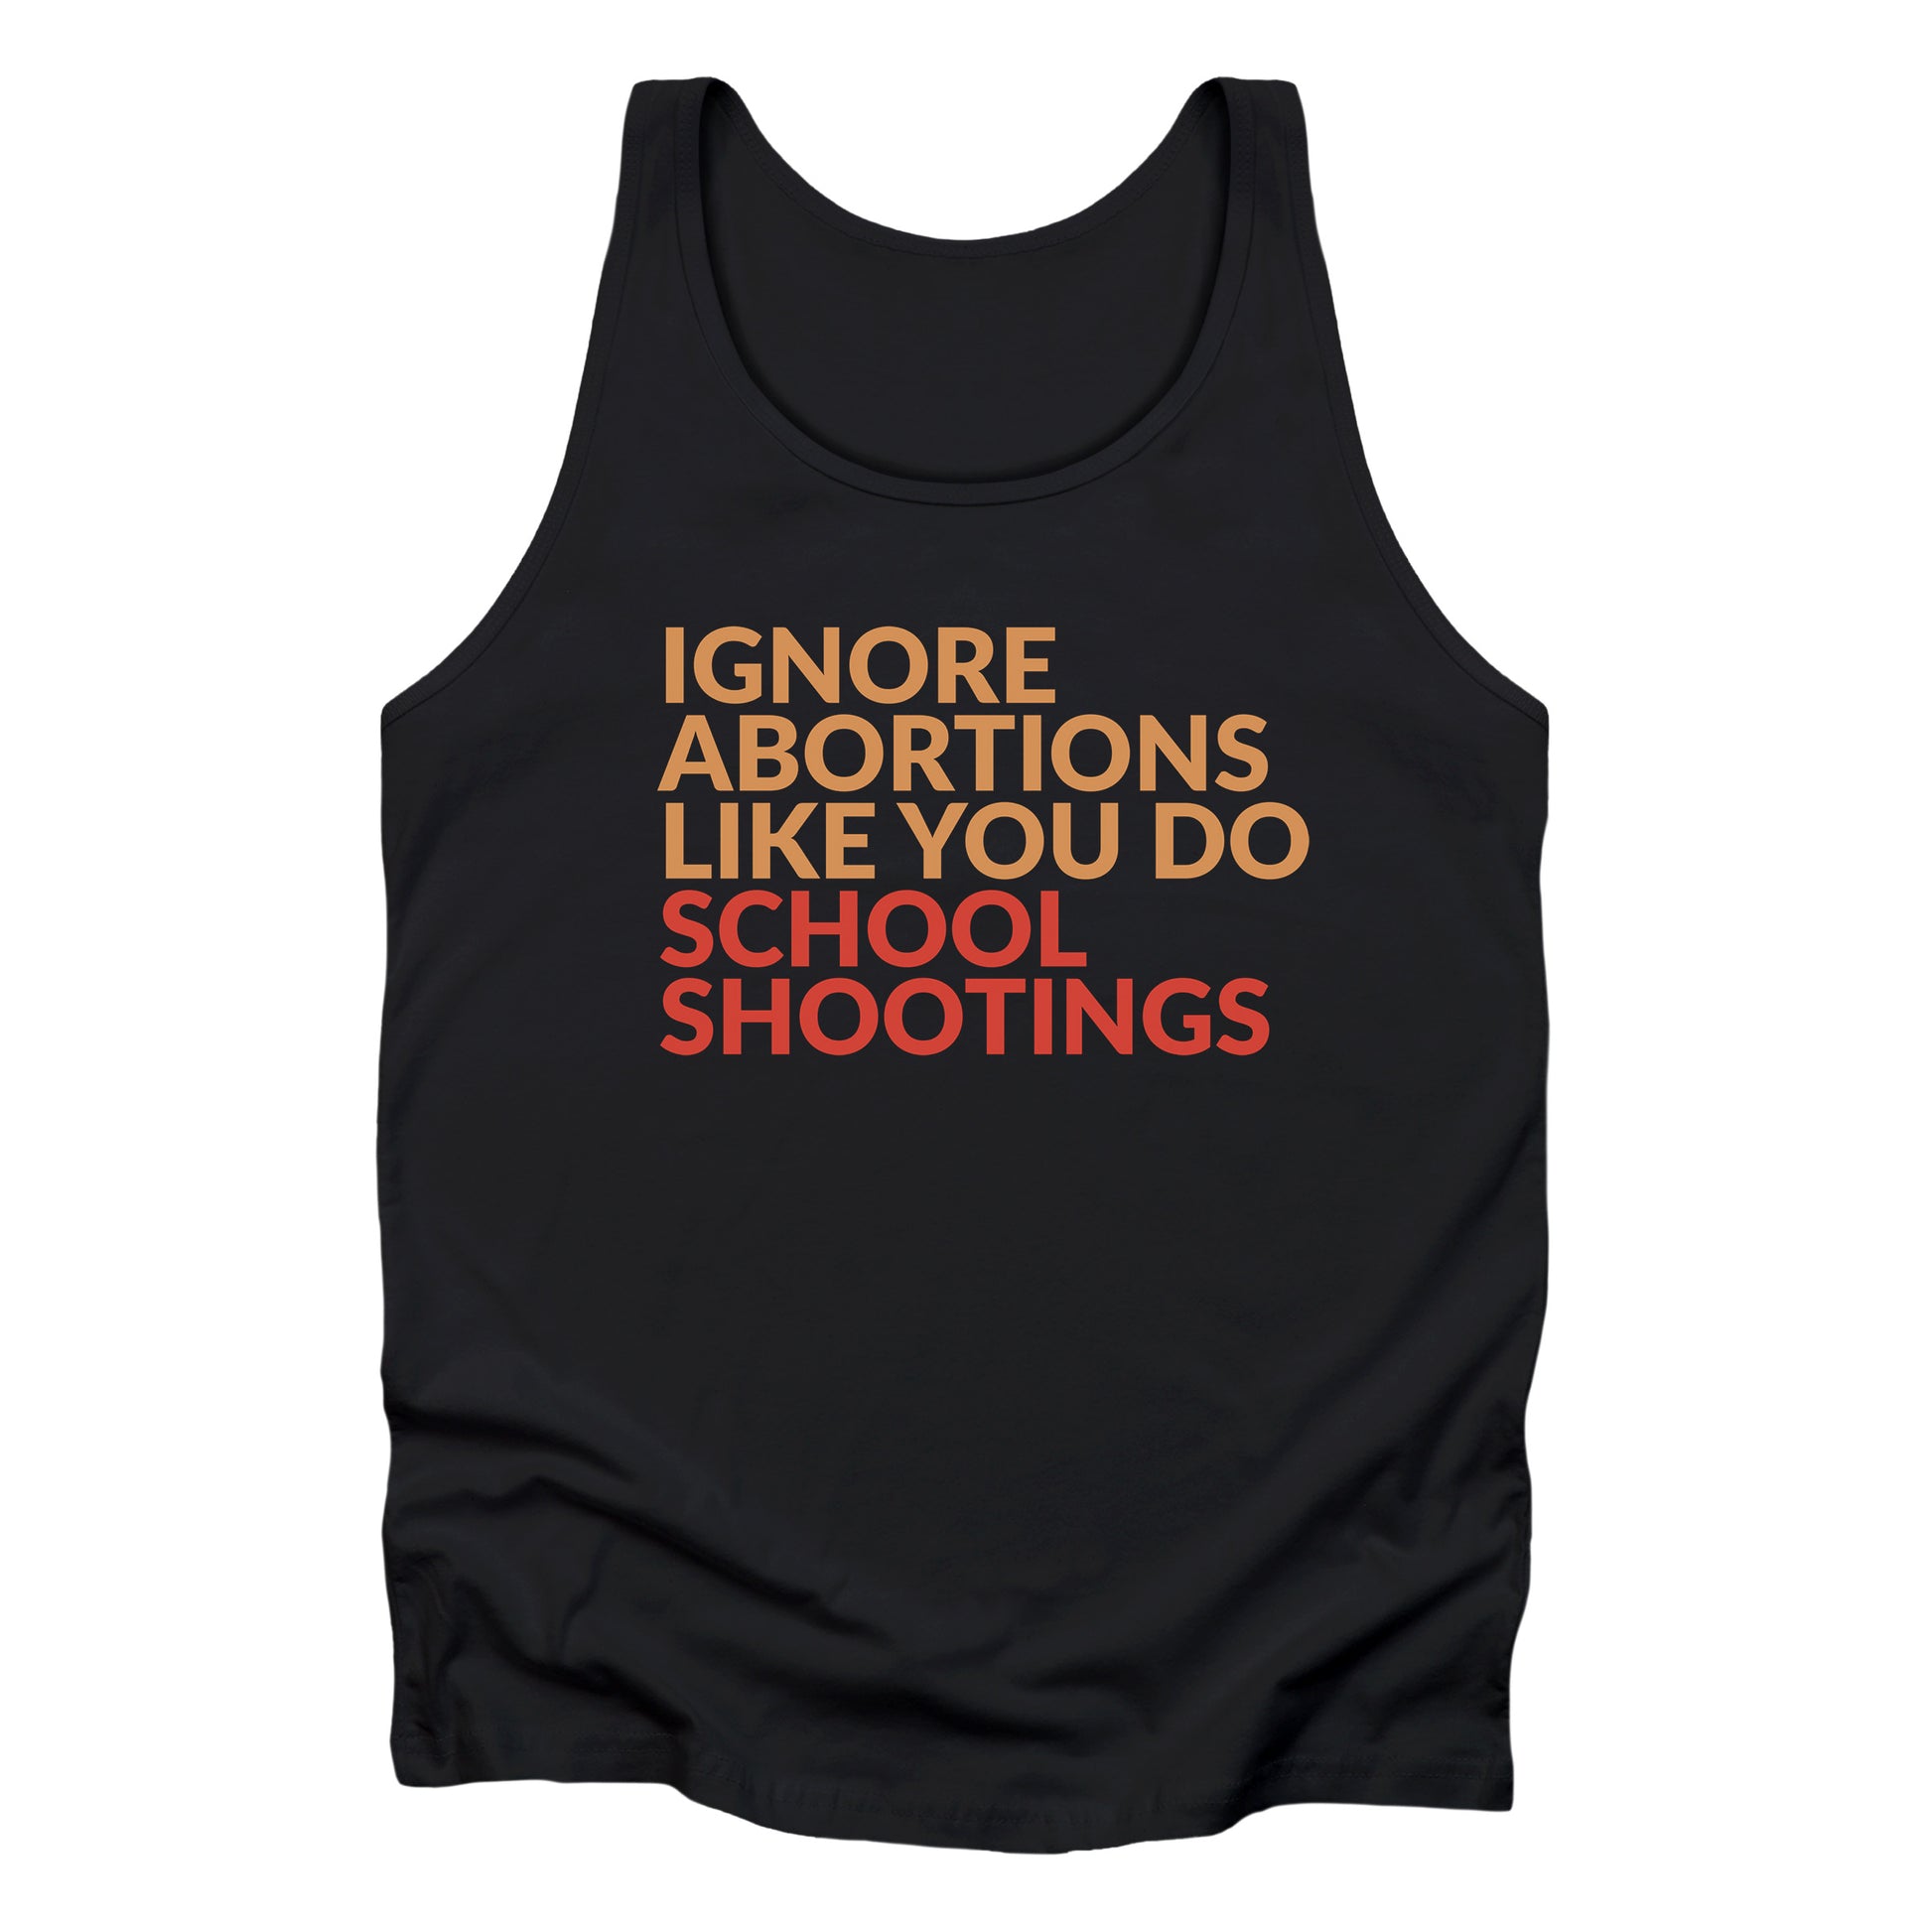 Black tank top that says “Ignore abortions like you do school shootings” in all caps in an orange font. The words “school shootings” are in red.